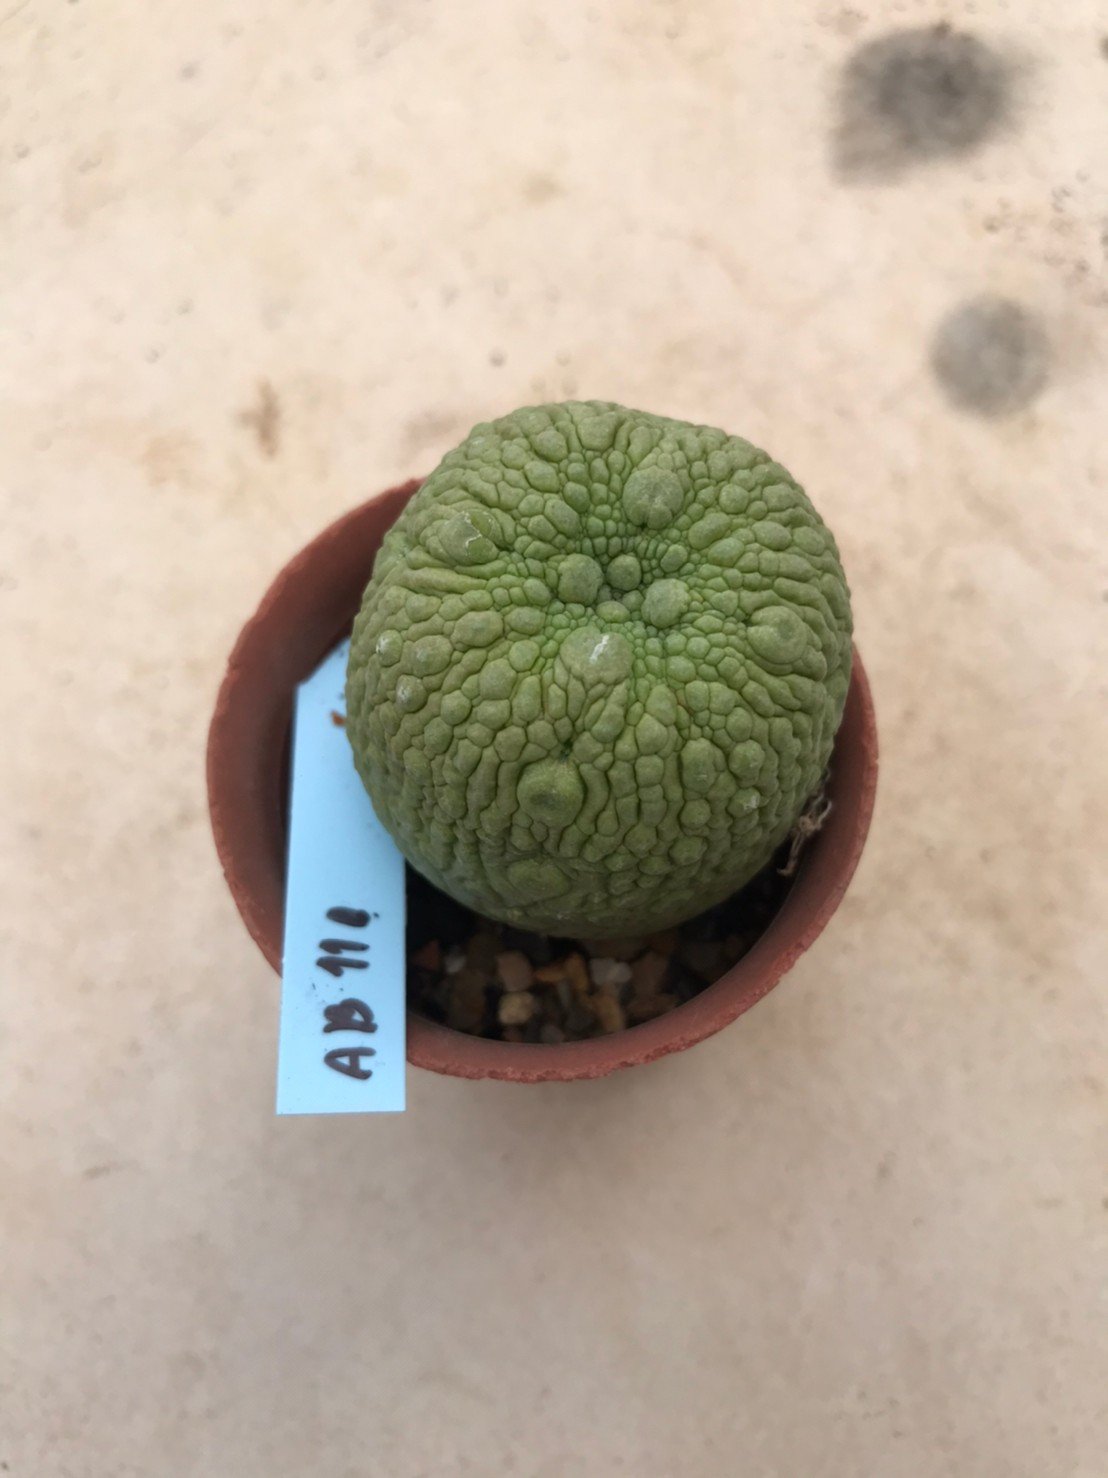 Pseudolithos grow from seed 5 years old - can give flower and seed